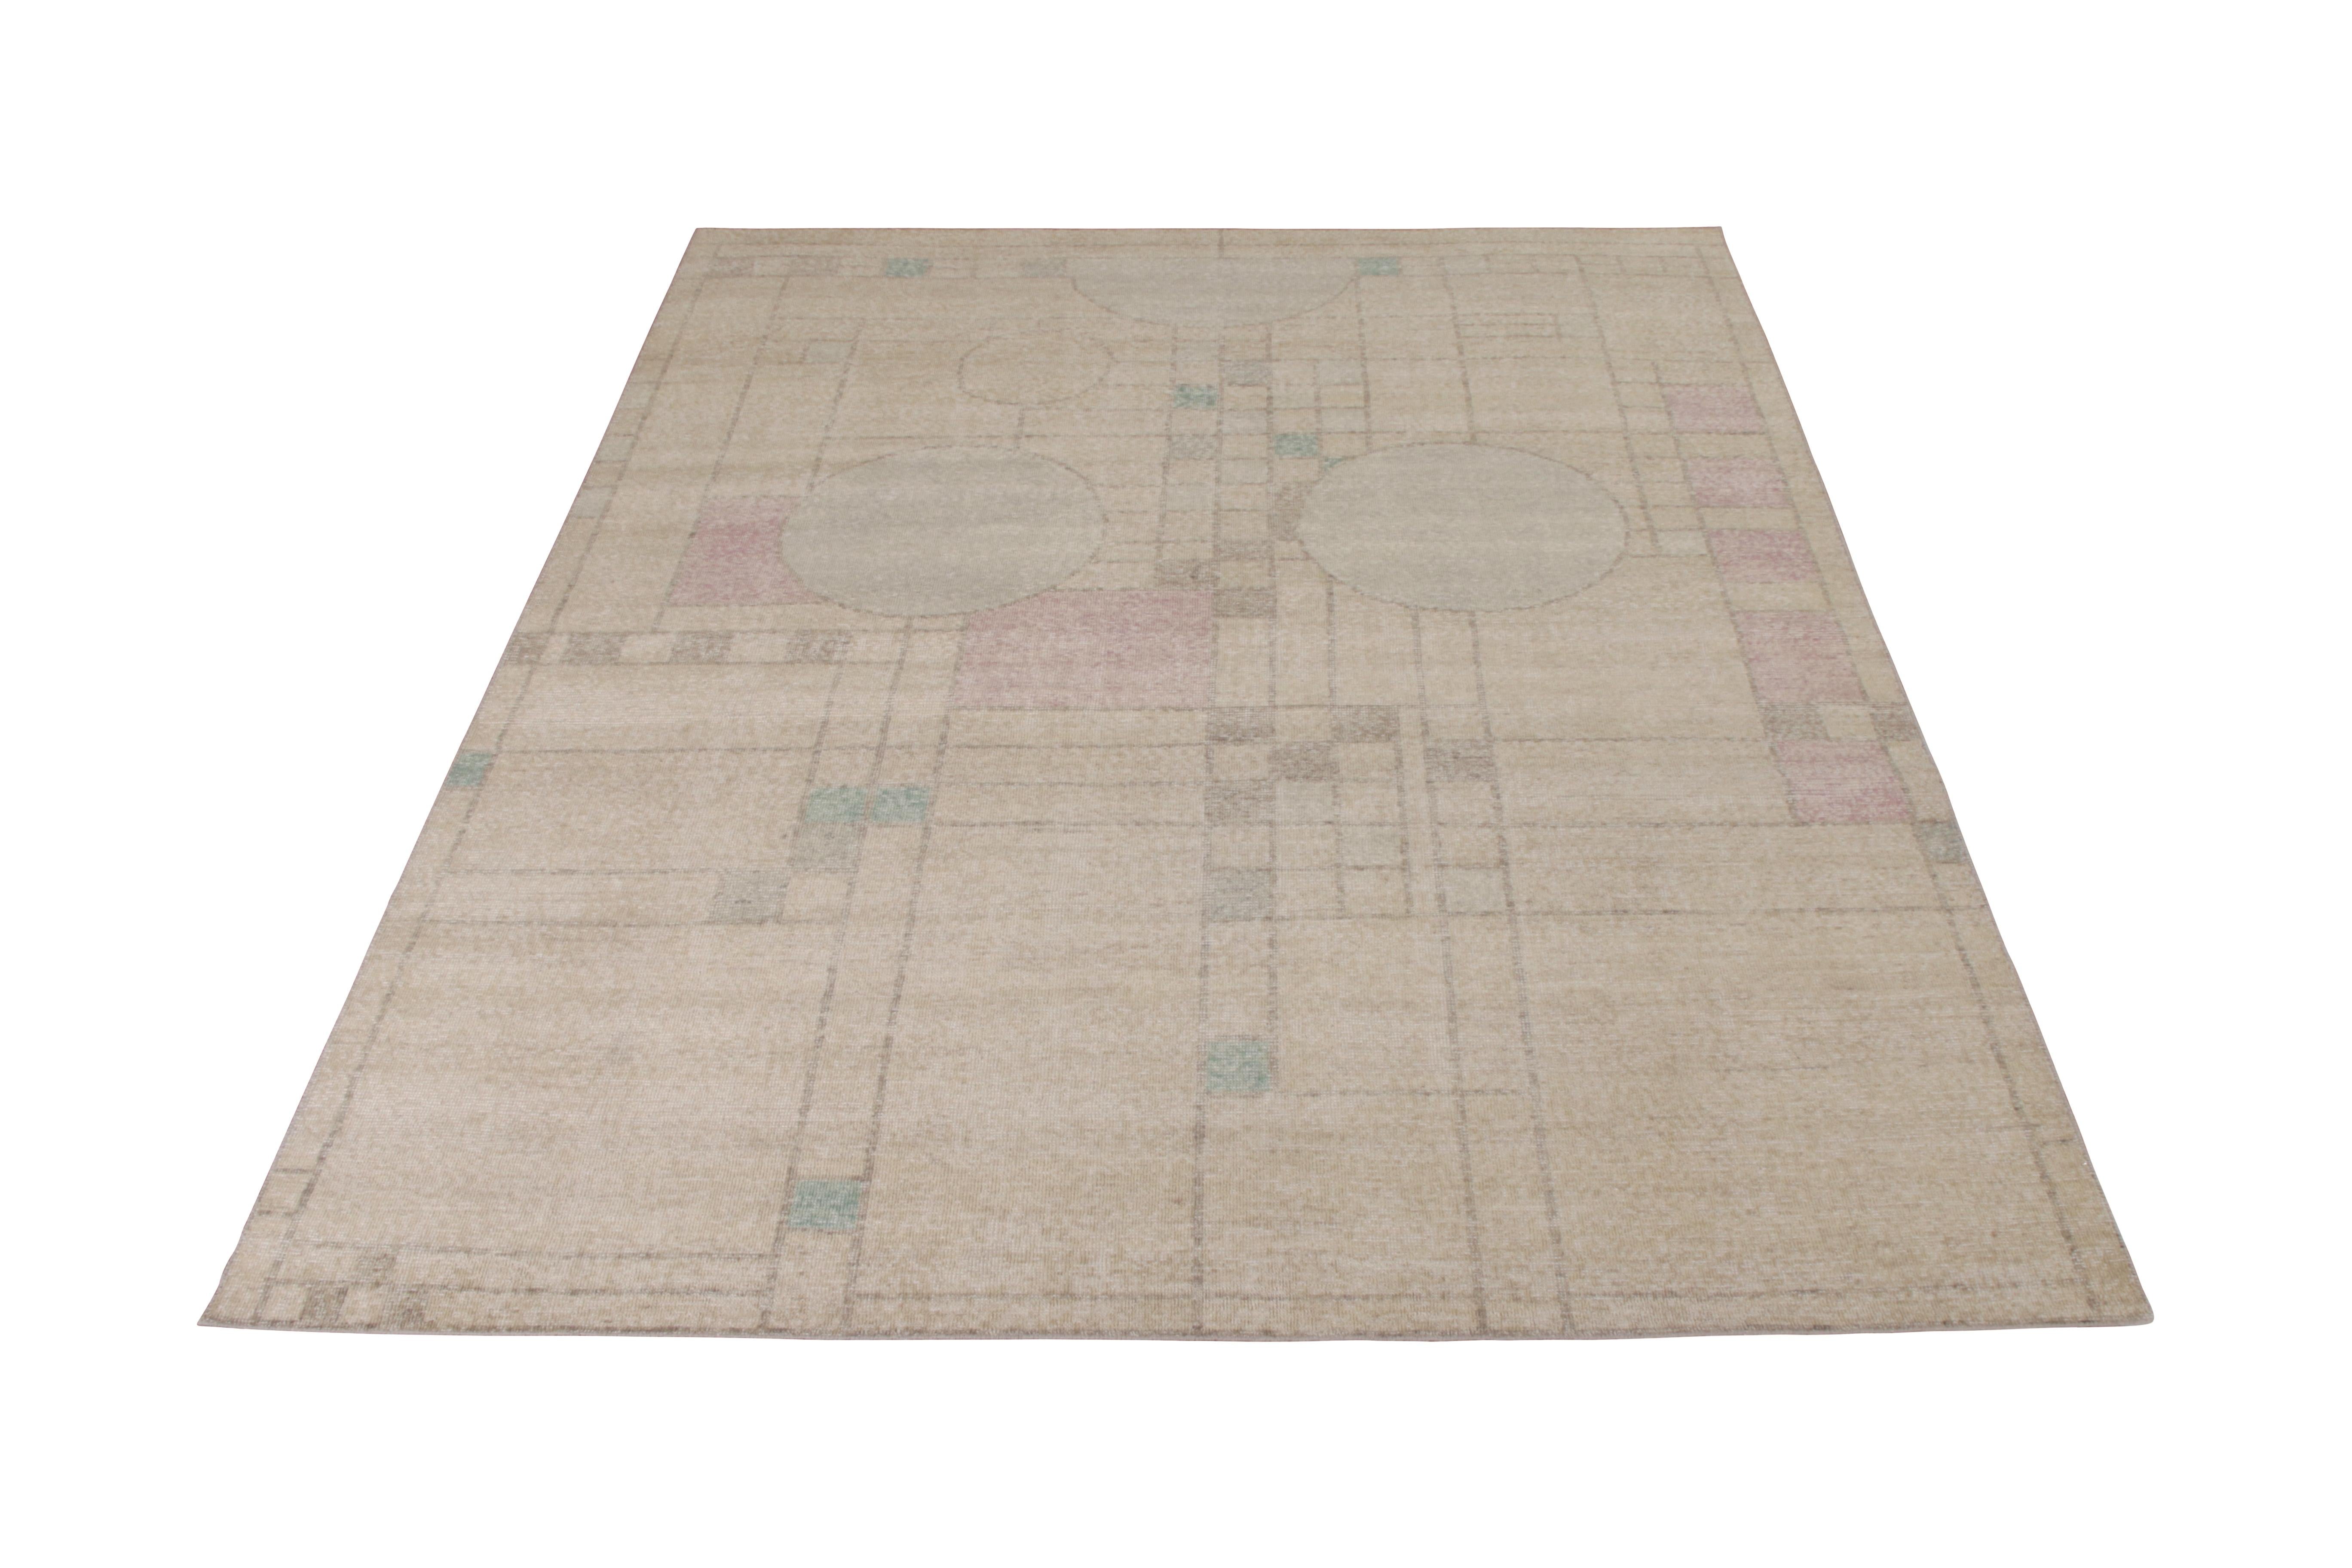 Handmade in a refined, low-pile wool with a comfortable wash achieving this shabby-chic distressed style, this 8 x 10 modern rug joins the Homage Collection by Rug & Kilim, representing an encyclopedic approach to reimagining Classic and modern rug